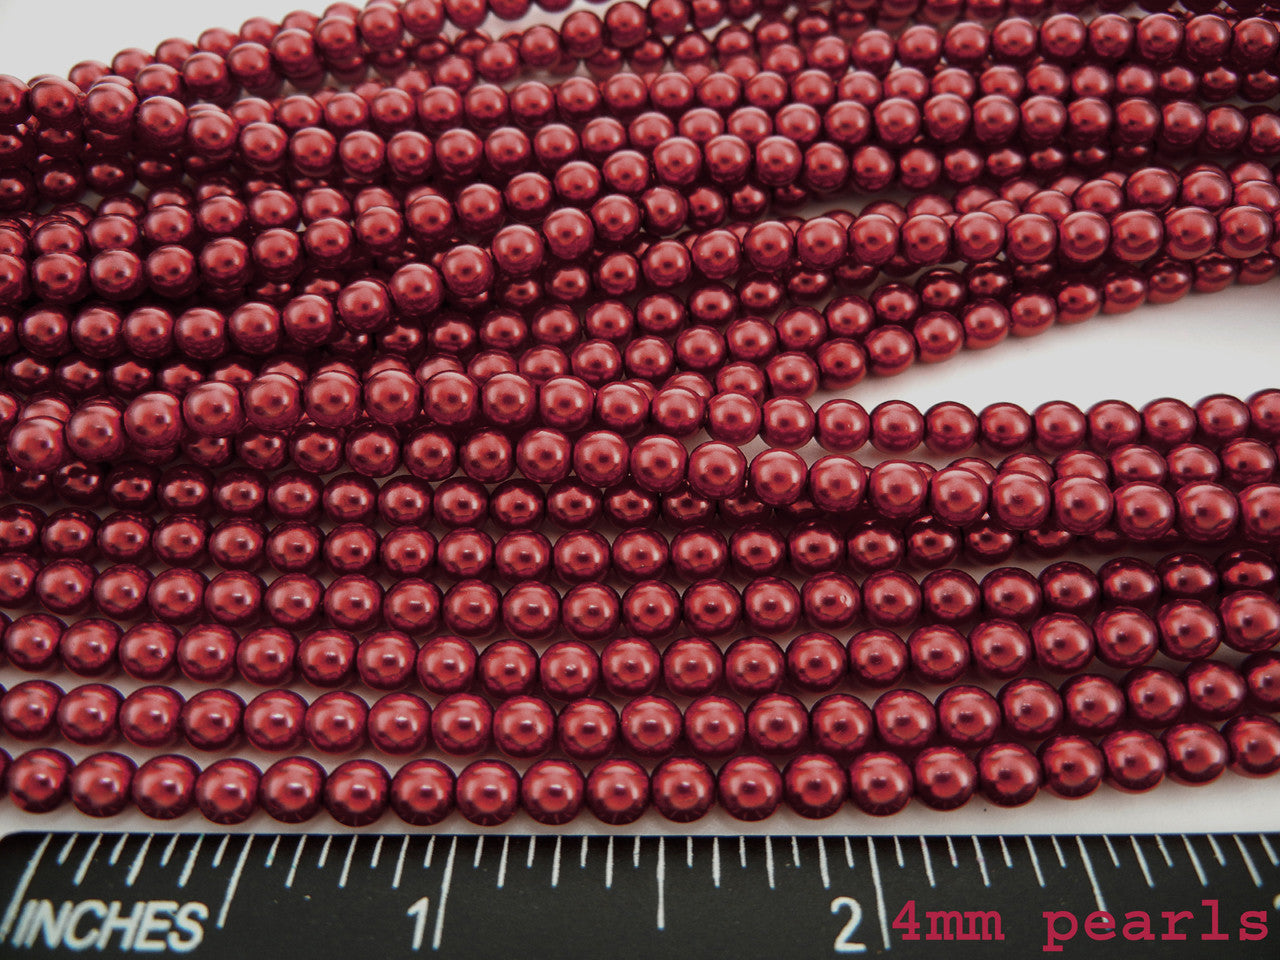 Czech Round Glass Imitation Pearls Vivid Burgundy Pearl color 2mm 3mm 4mm 6mm 8mm